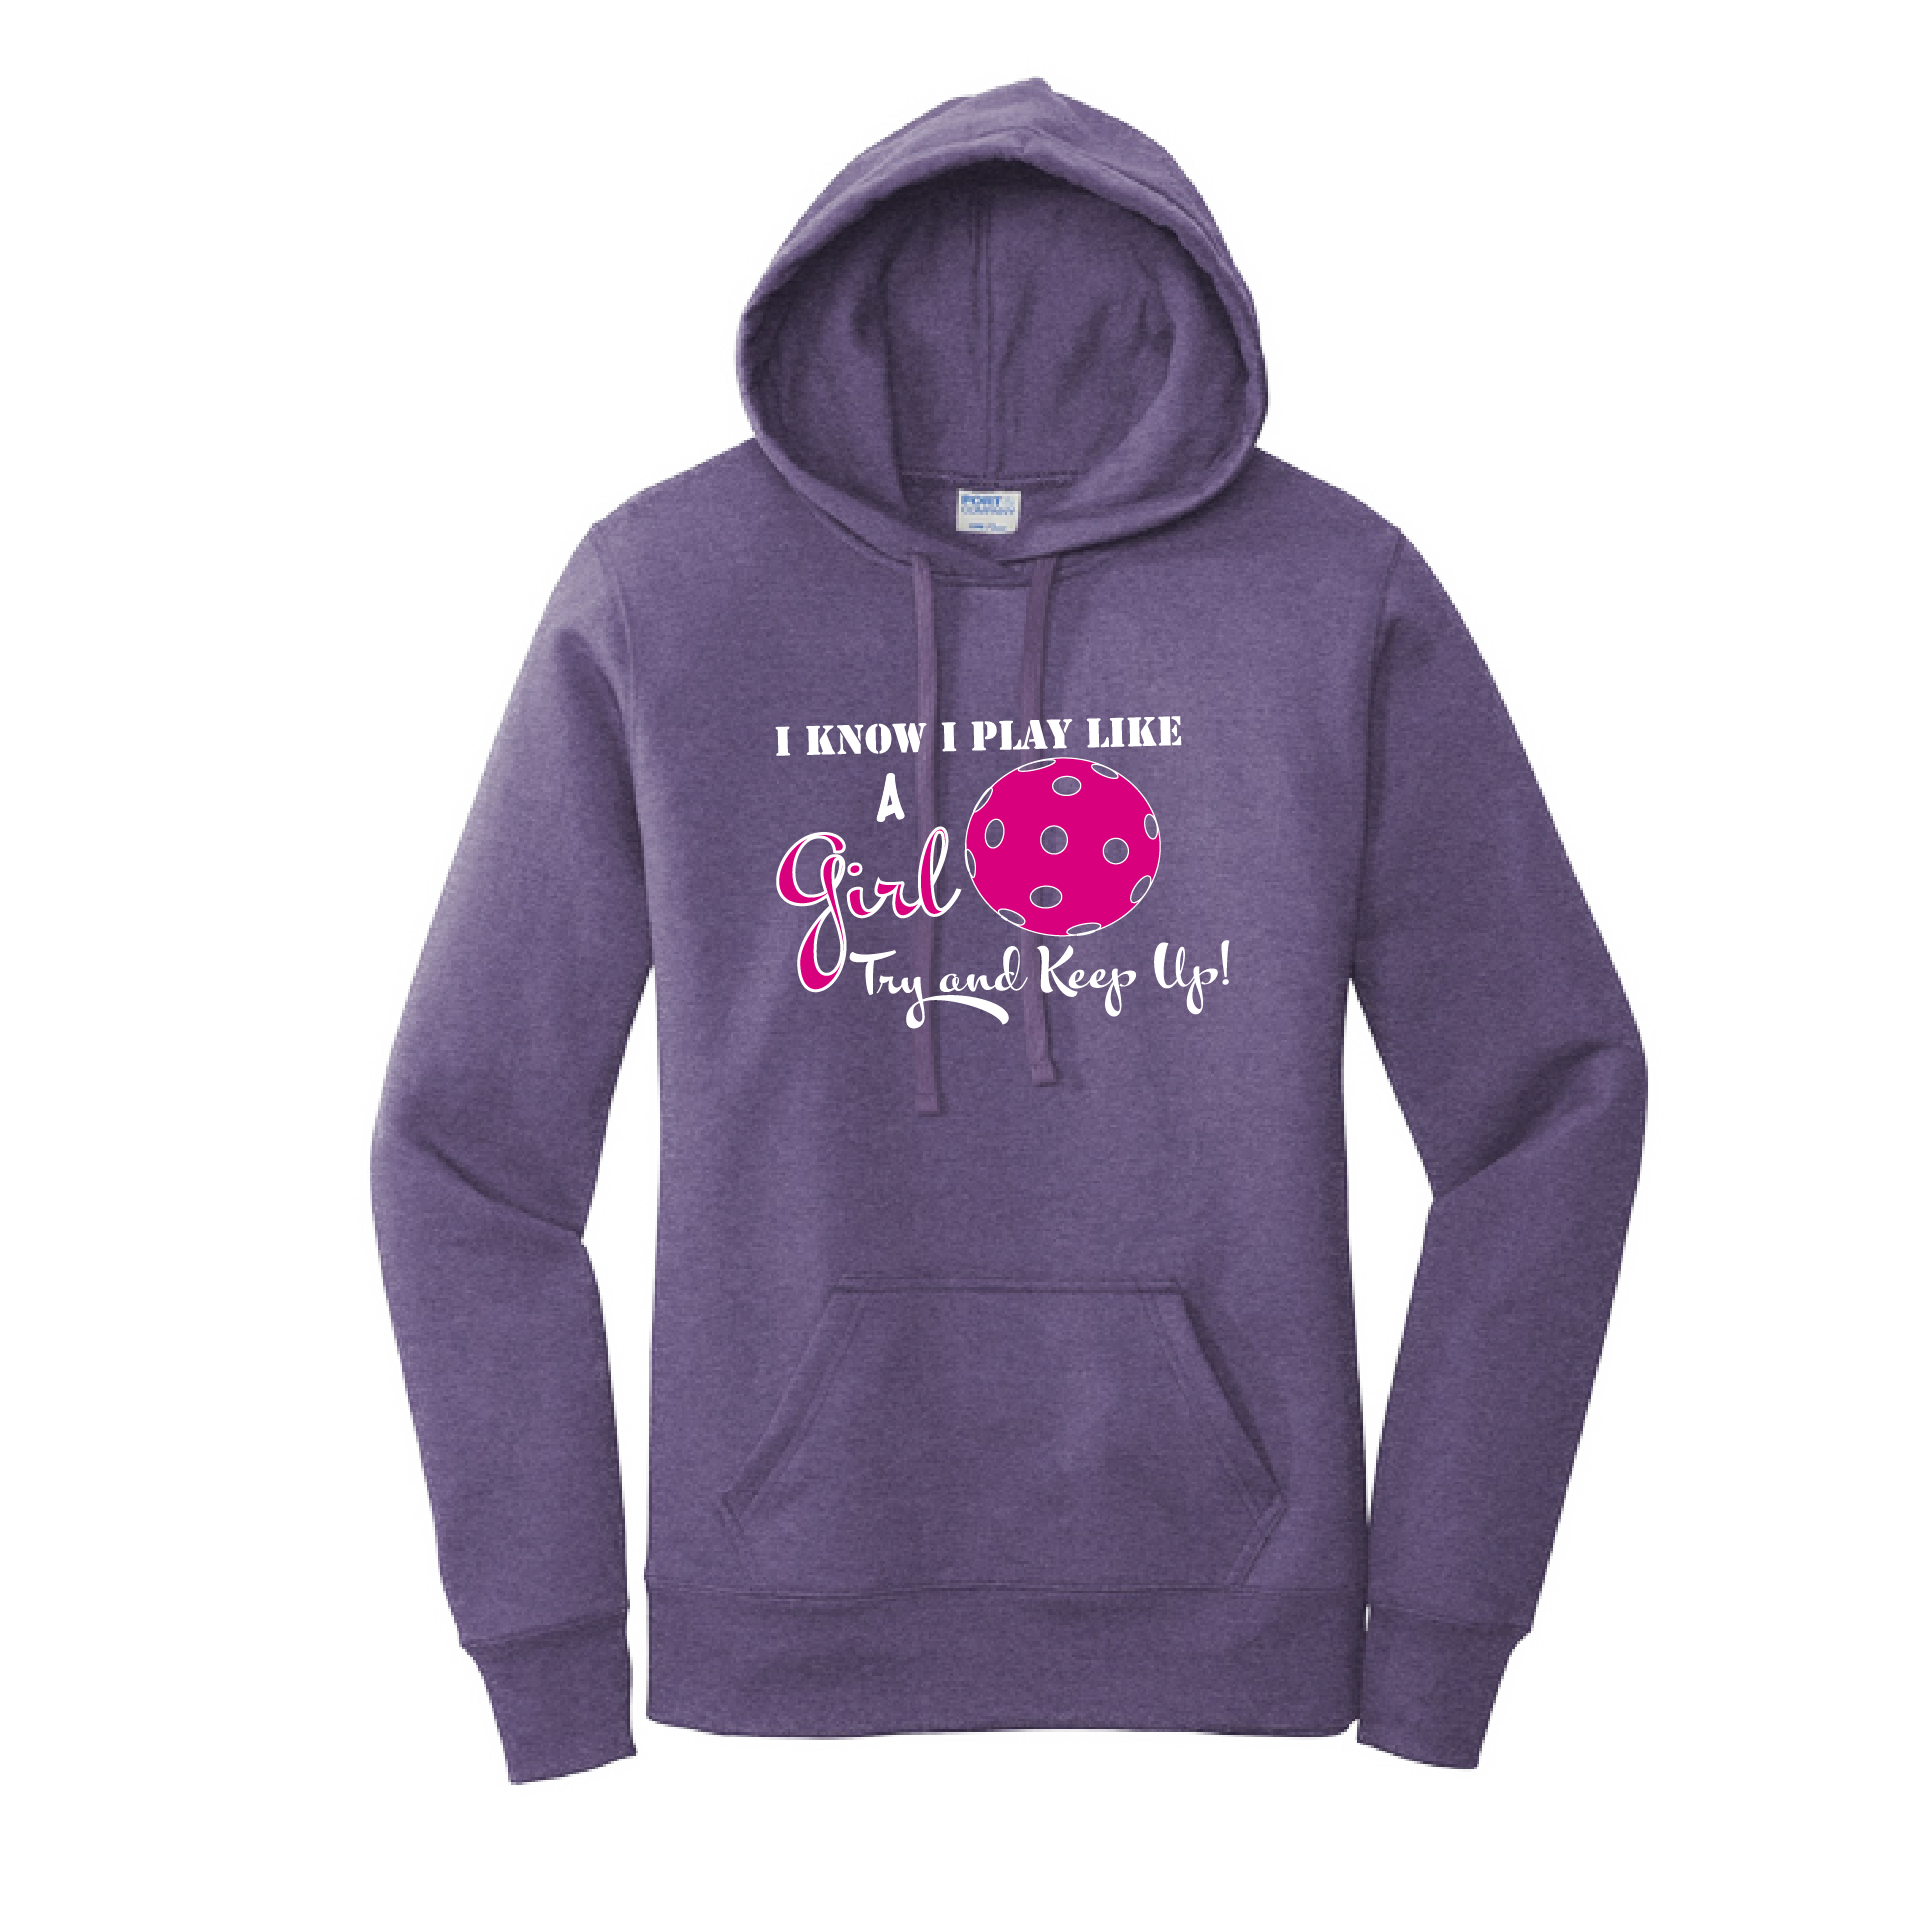 Pickleball Design: I know I Play Like a Girl, Try to Keep Up -  Women's Hooded pullover Sweatshirt  Turn up the volume in this Women's Sweatshirts with its perfect mix of softness and attitude. Ultra soft lined inside with a lined hood also. This is fitted nicely for a women's figure. Front pouch pocket.